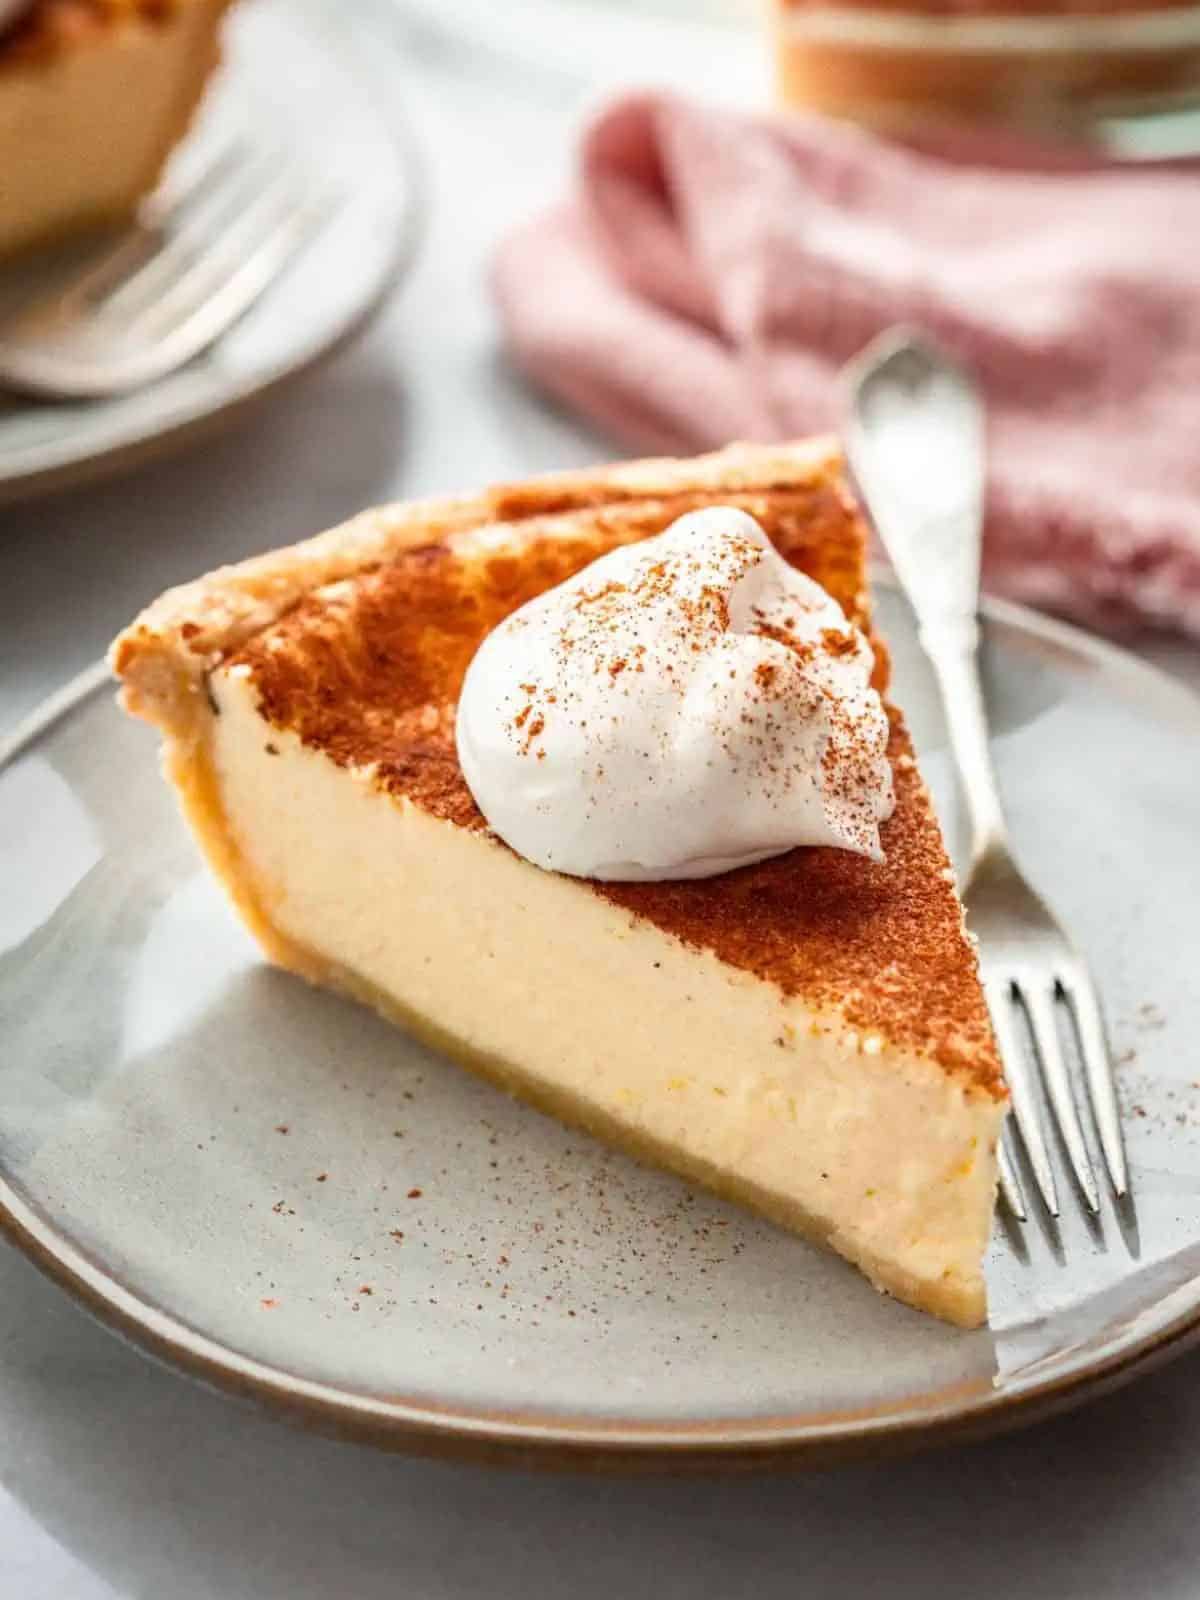 a tempting Italian ricotta pie with a golden, flaky crust, adorned with a dusting of cocoa and whipped cream.